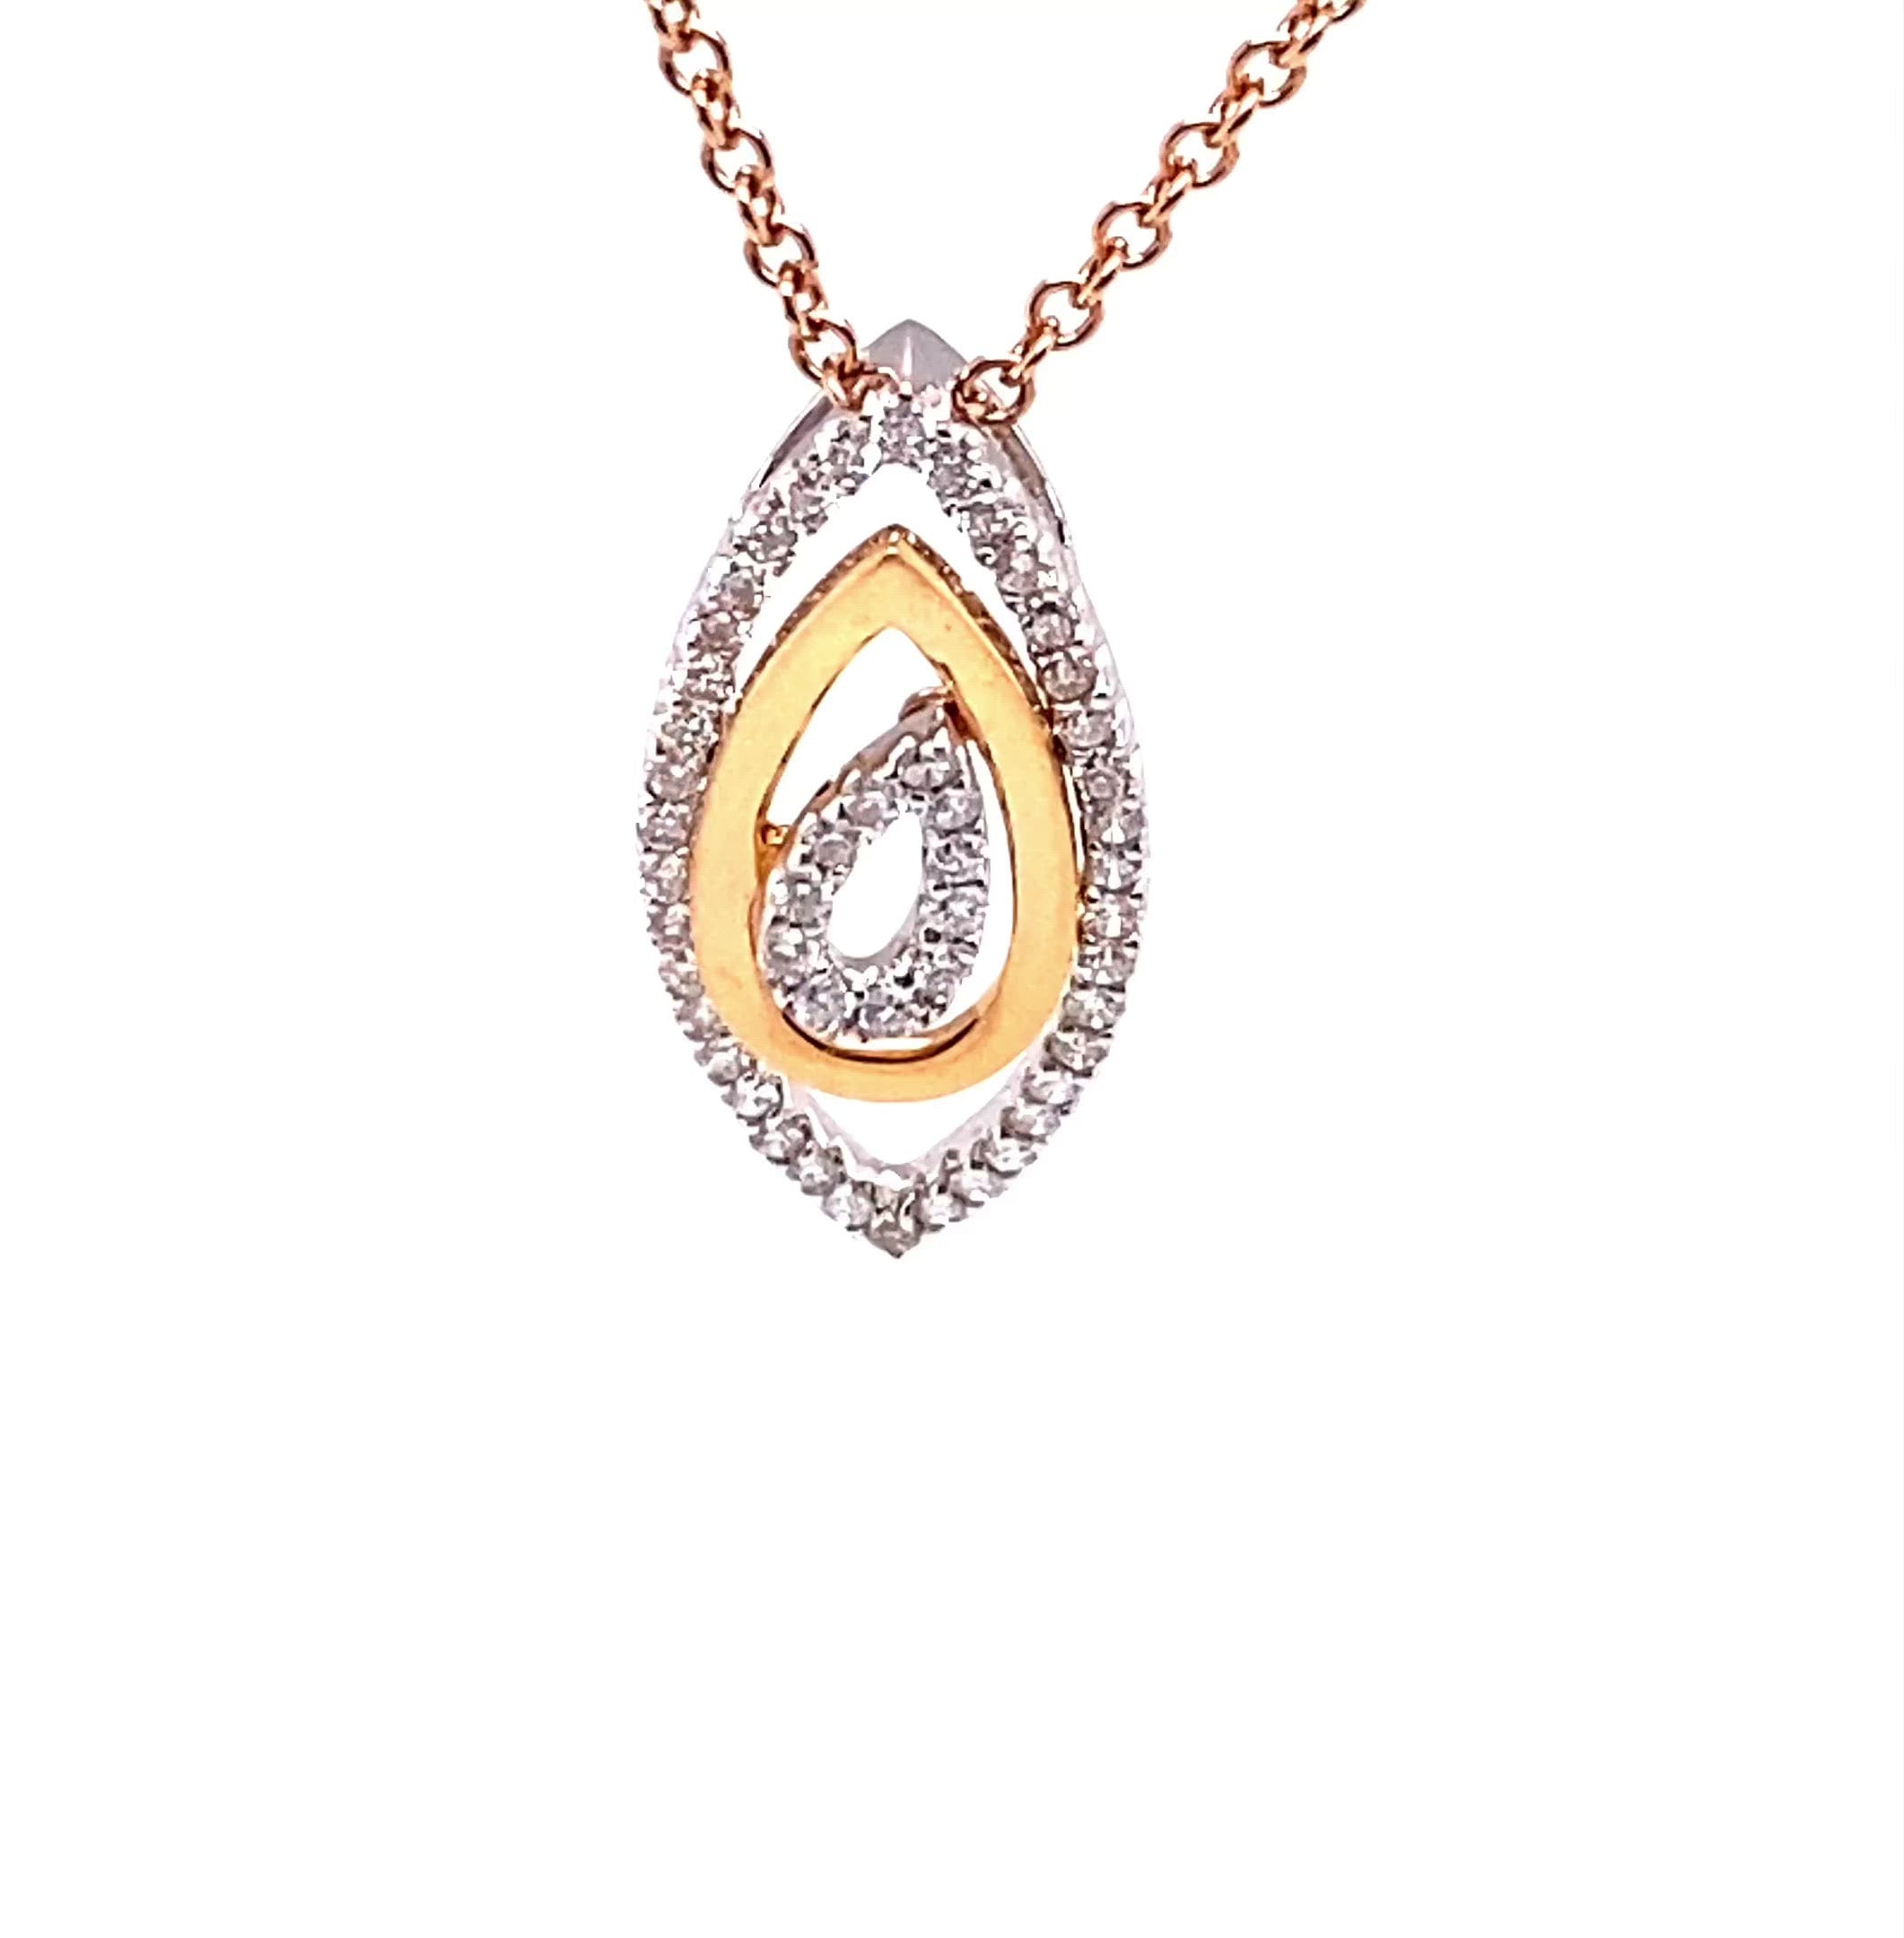 Natural Diamond Necklace 18K Solid Rose Gold .74tcw Gemstone Pendant Necklace Fine Jewelry Estate Jewelry Statement Necklace Diamond Pendnat